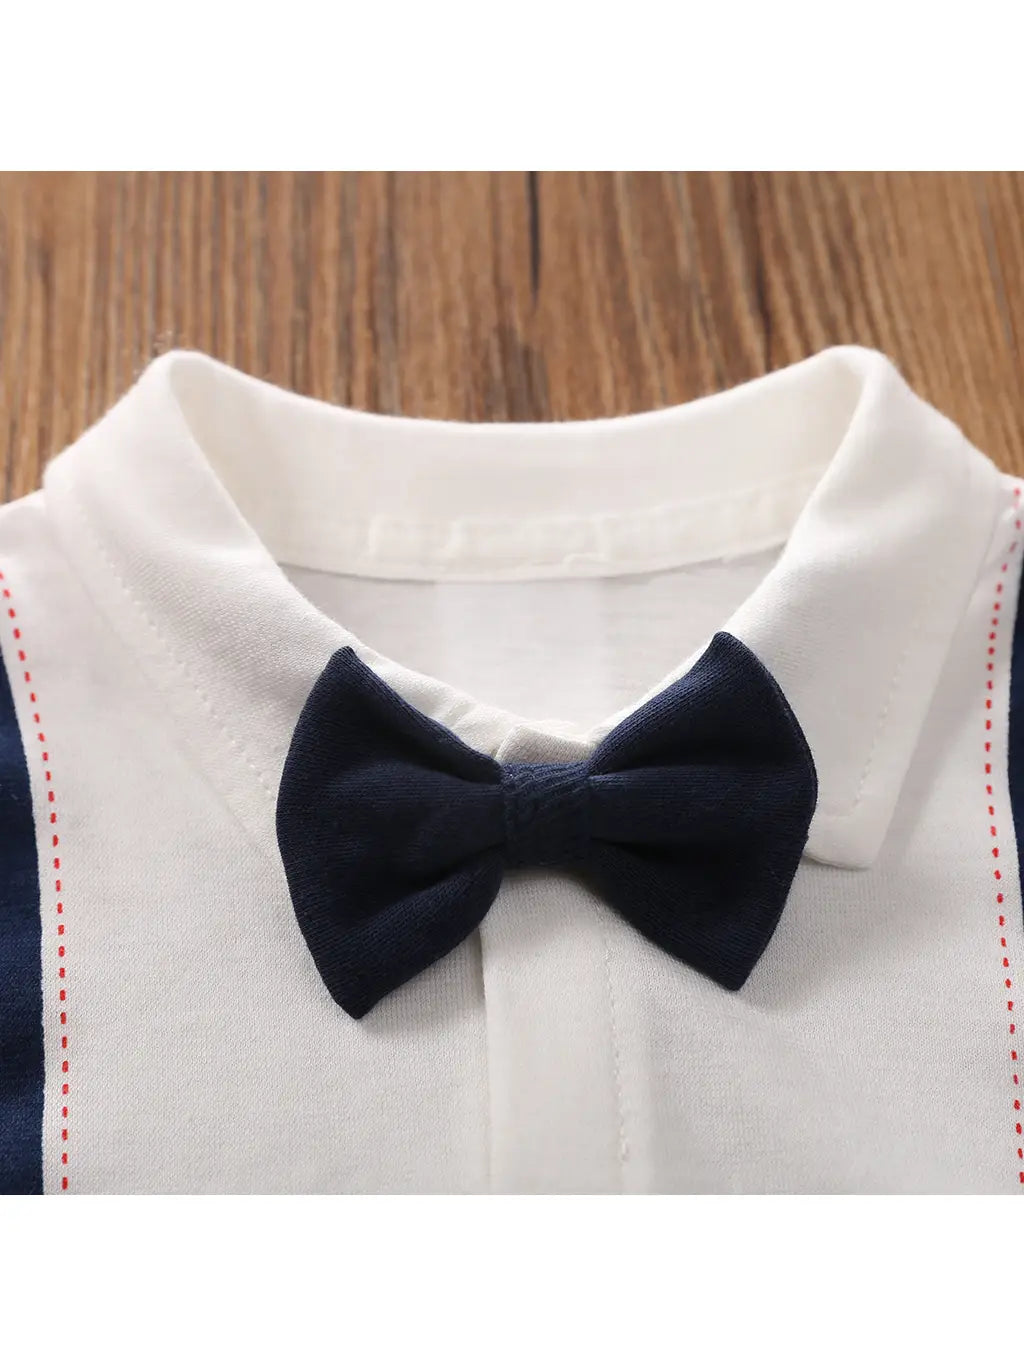 Baby Boy "Suite" Romper with Removable Bowtie